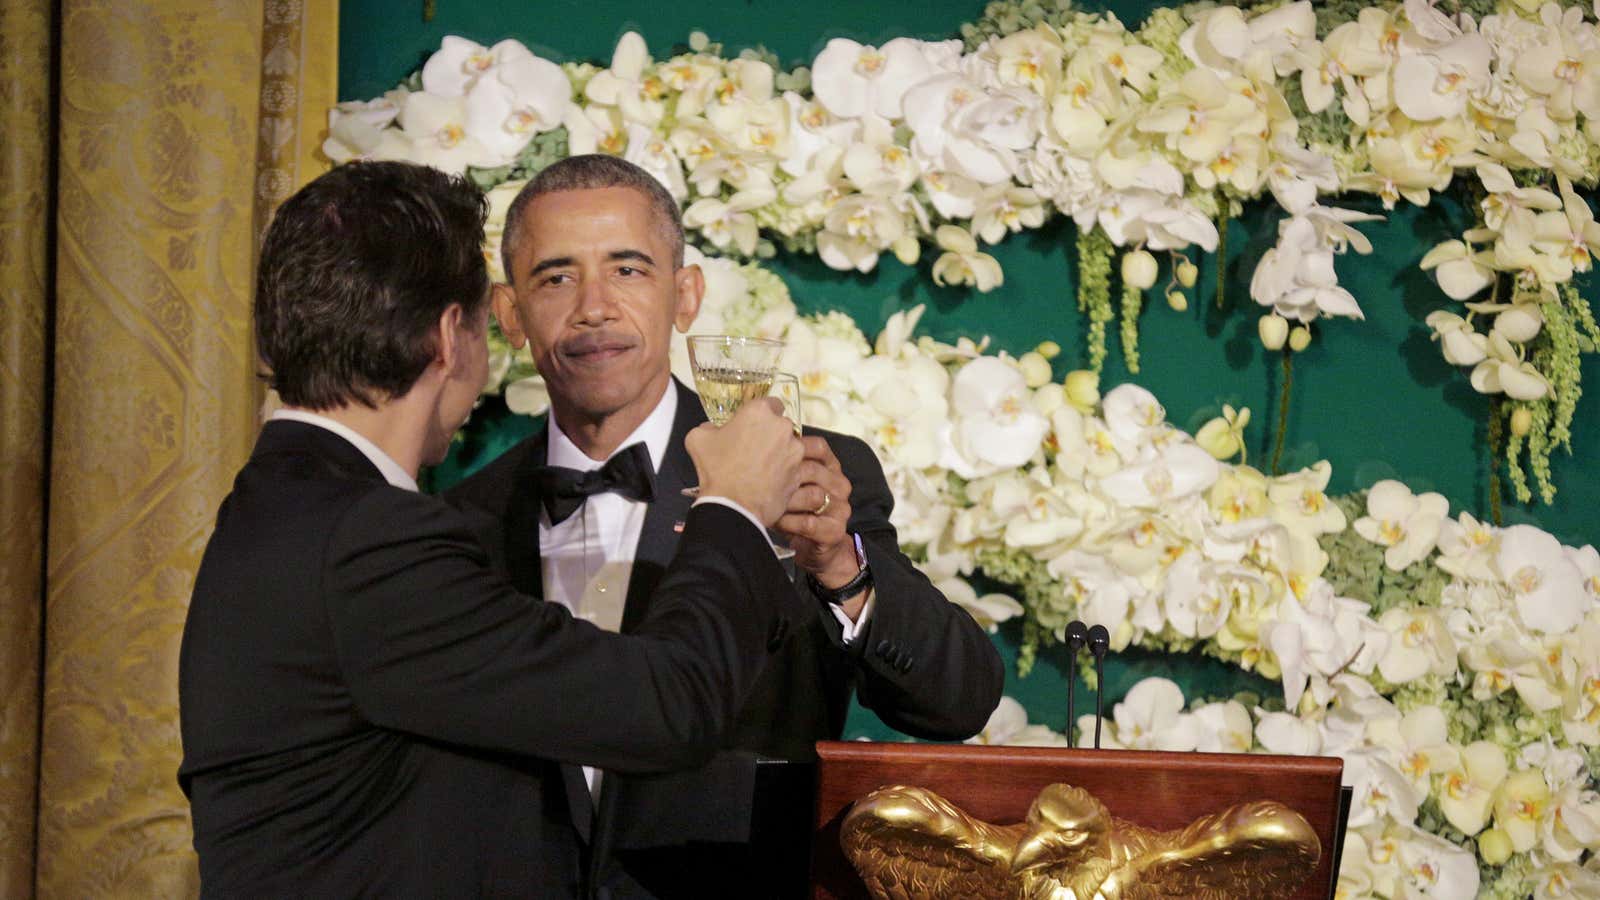 Photos Bromance Was In The Air As The Obamas Hosted The Trudeaus At A Washington State Dinner